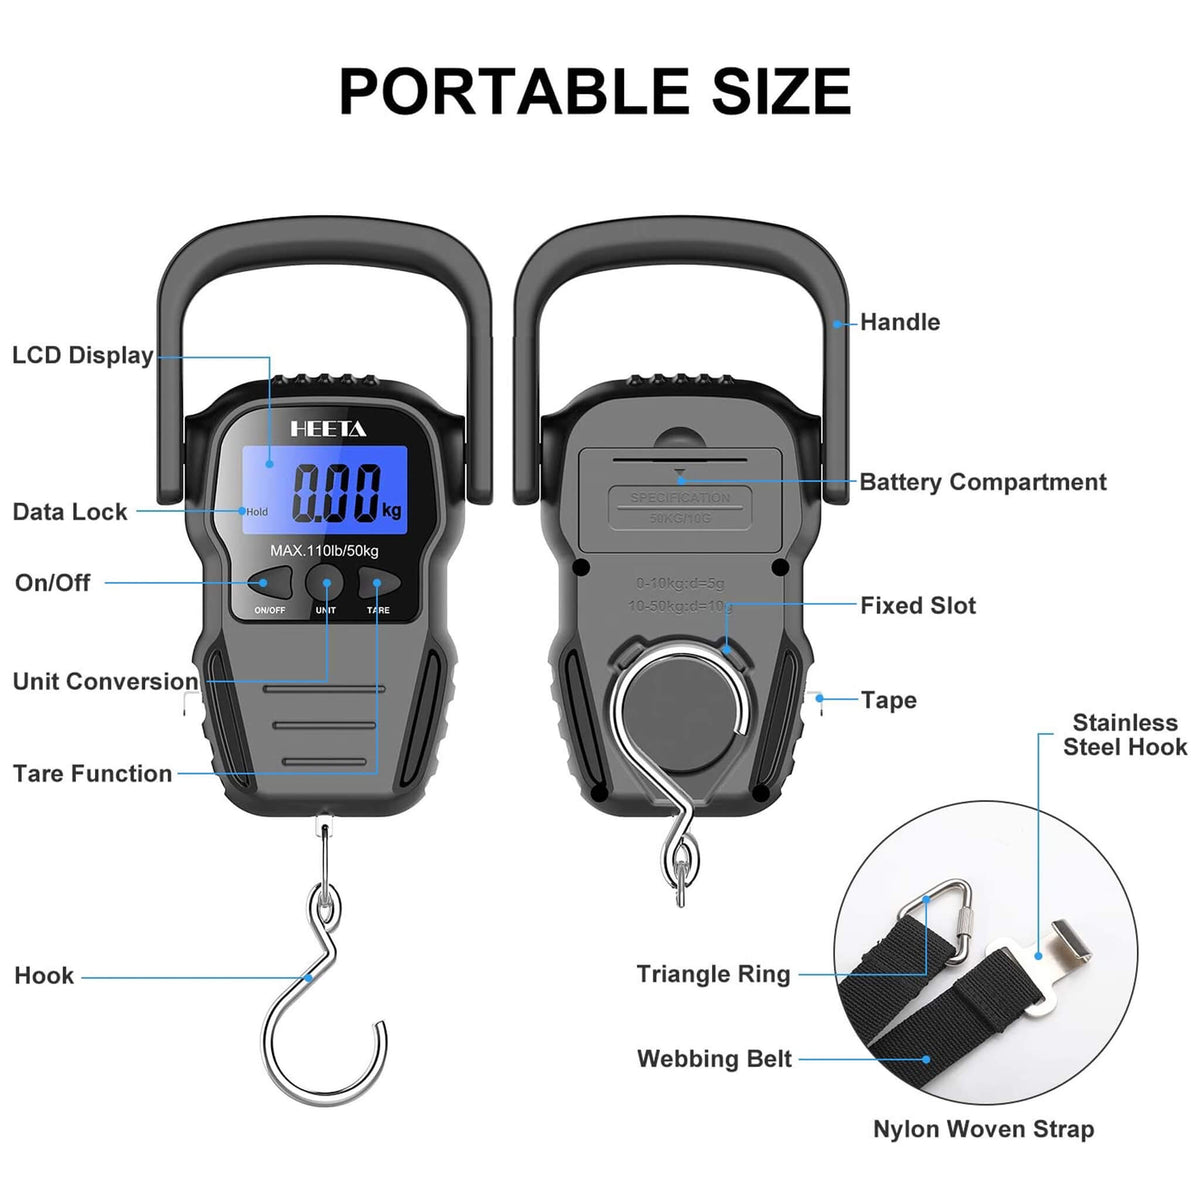 Fishing Scales Digital Fish Weight Scale Electronic Hanging Hook Portable